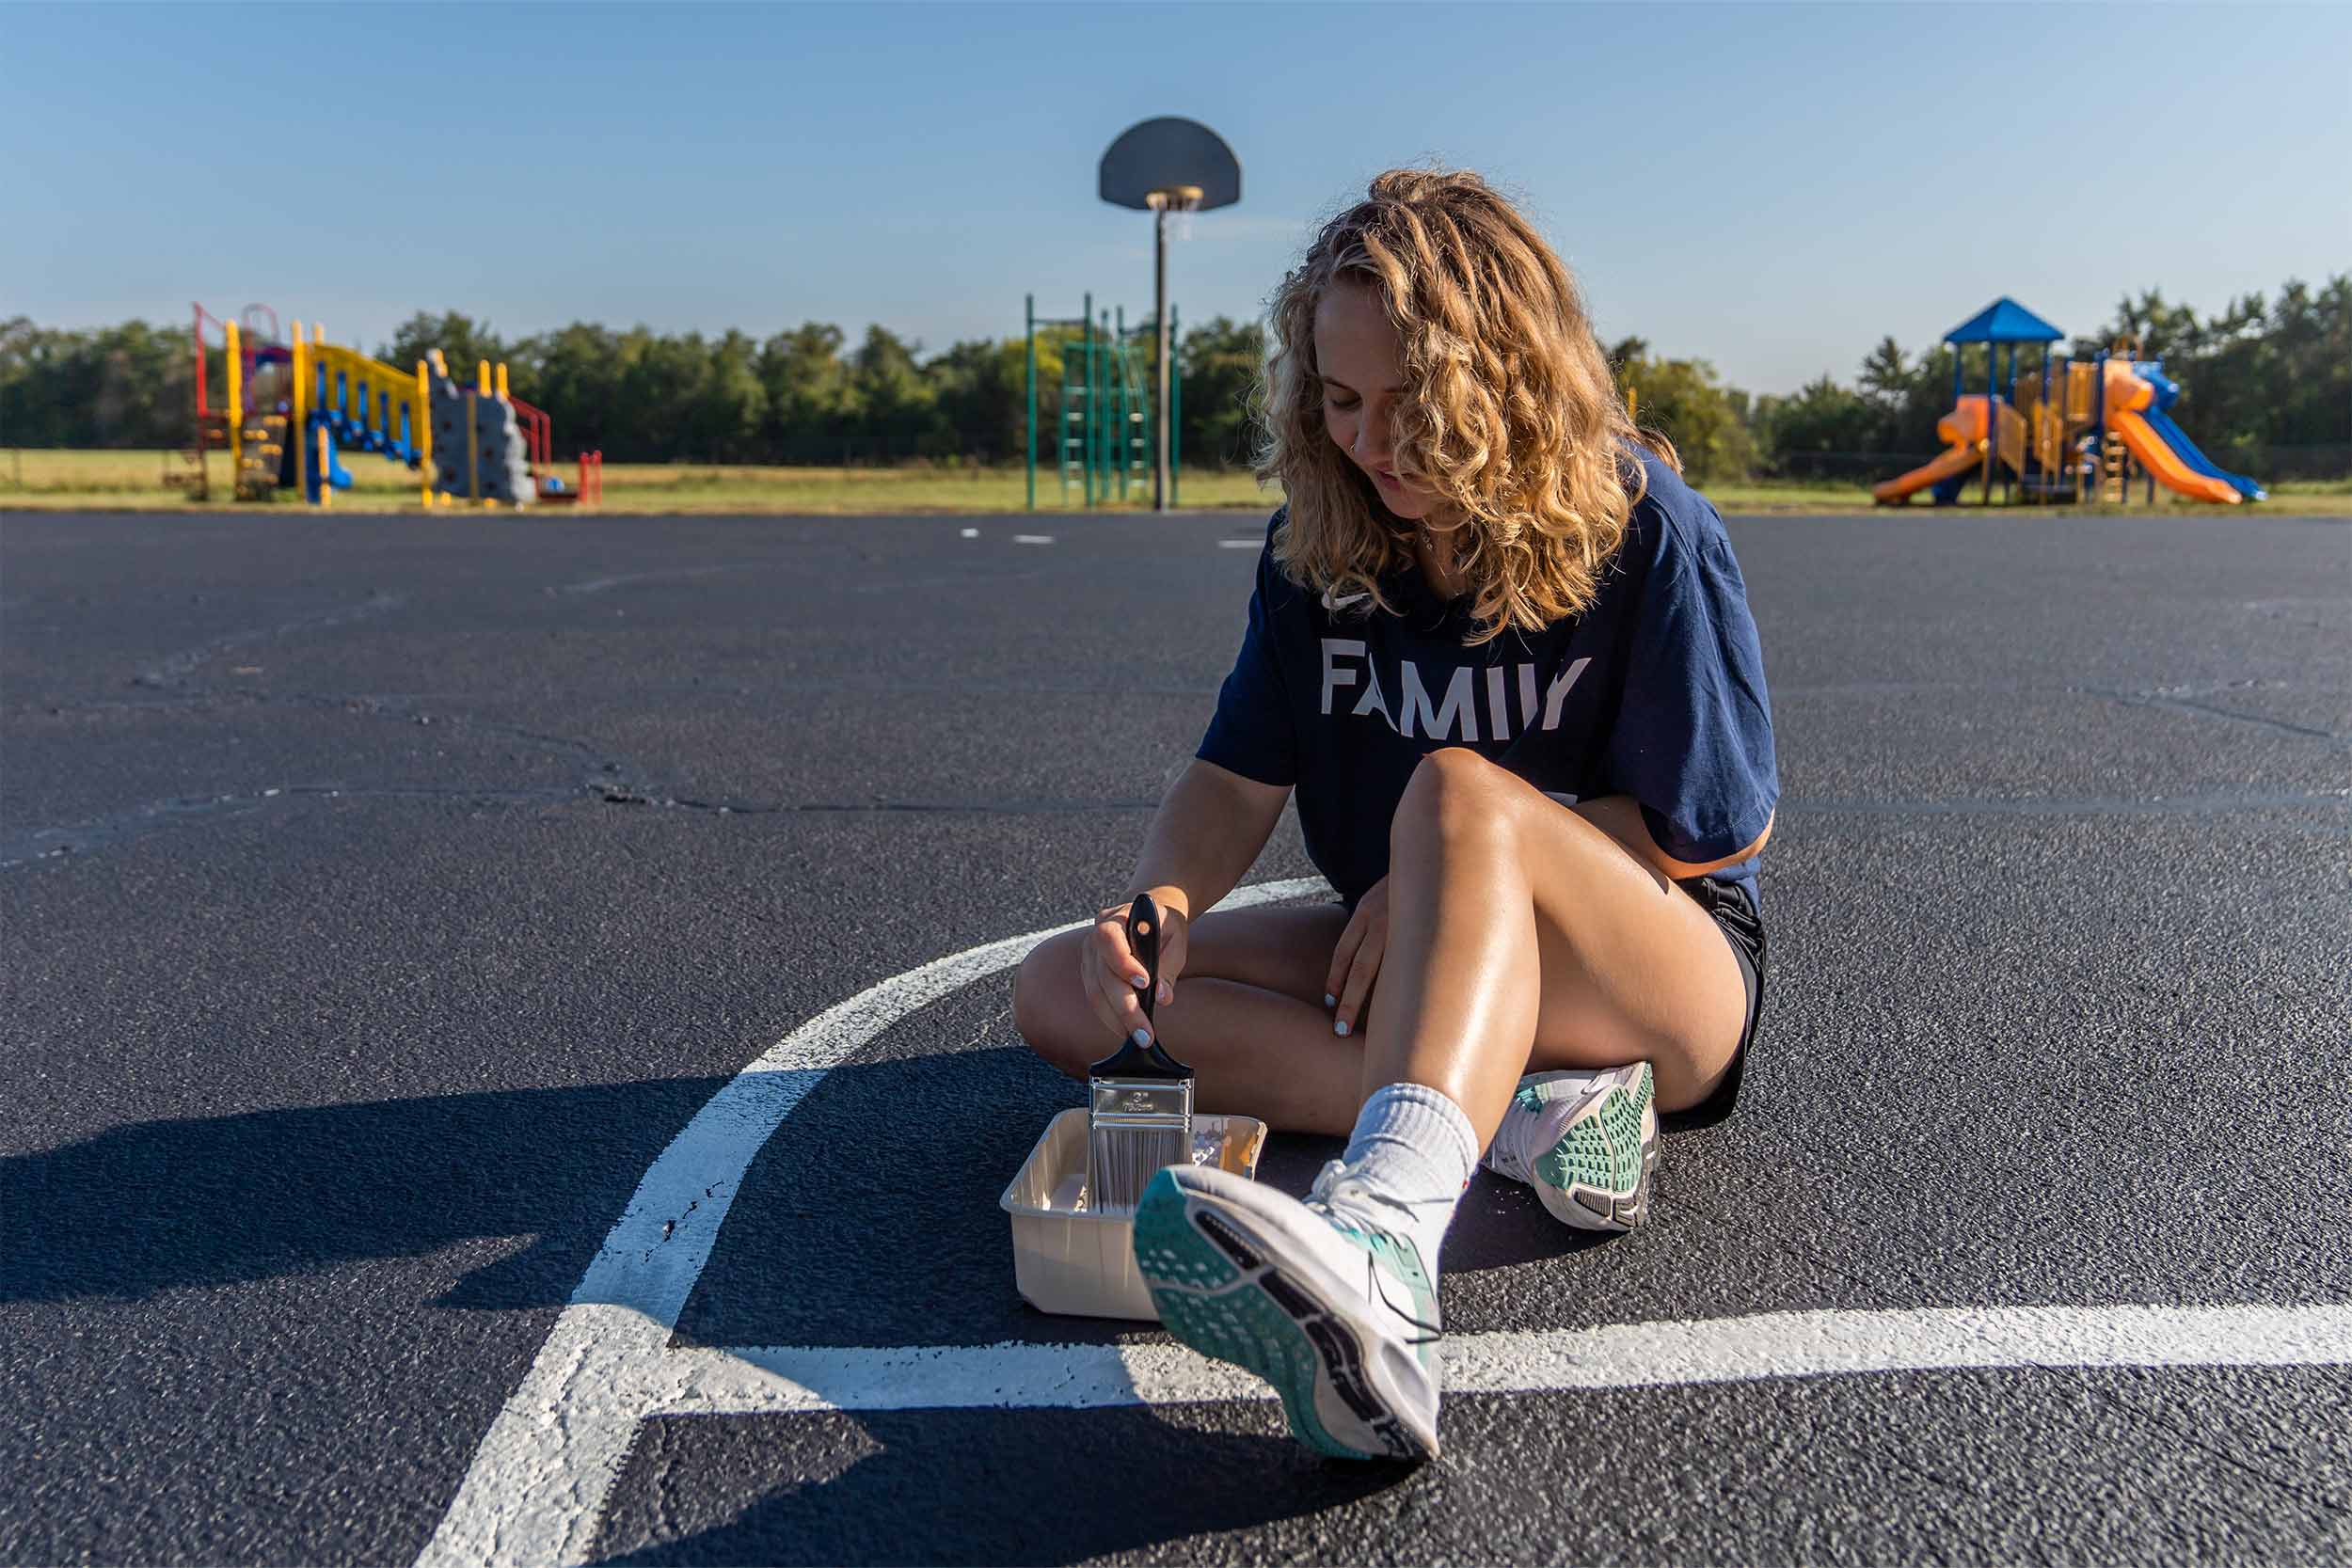 A volunteer uses a paint brush to repaint lines on an outdoor basketball court.